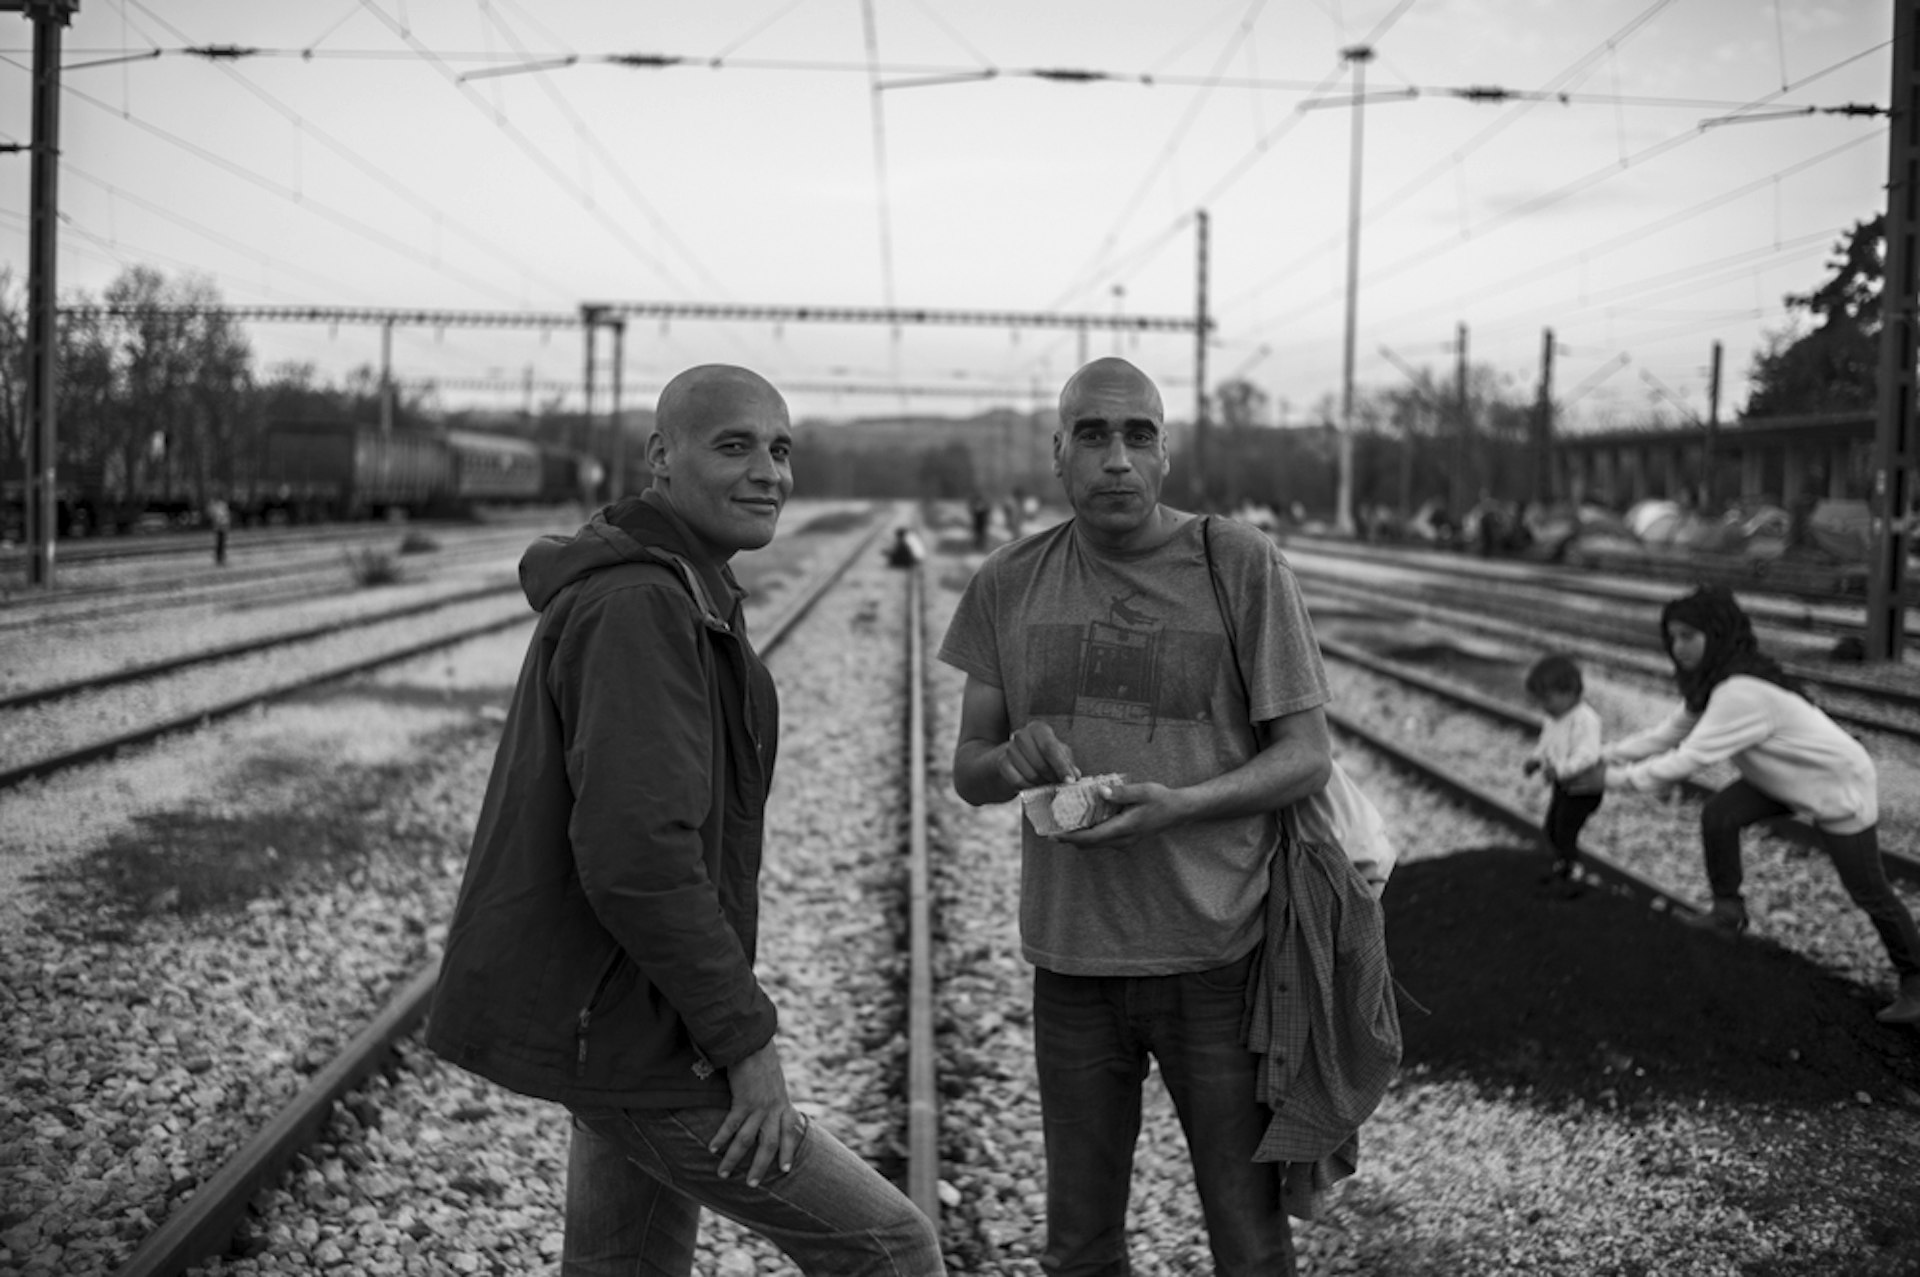  Karim (left) and Hassan (right) from Algeria, standing in the centre of the tracks outside Idomeni Station. An outbreak of lice in the camp means many of the residents have shaved their heads. 